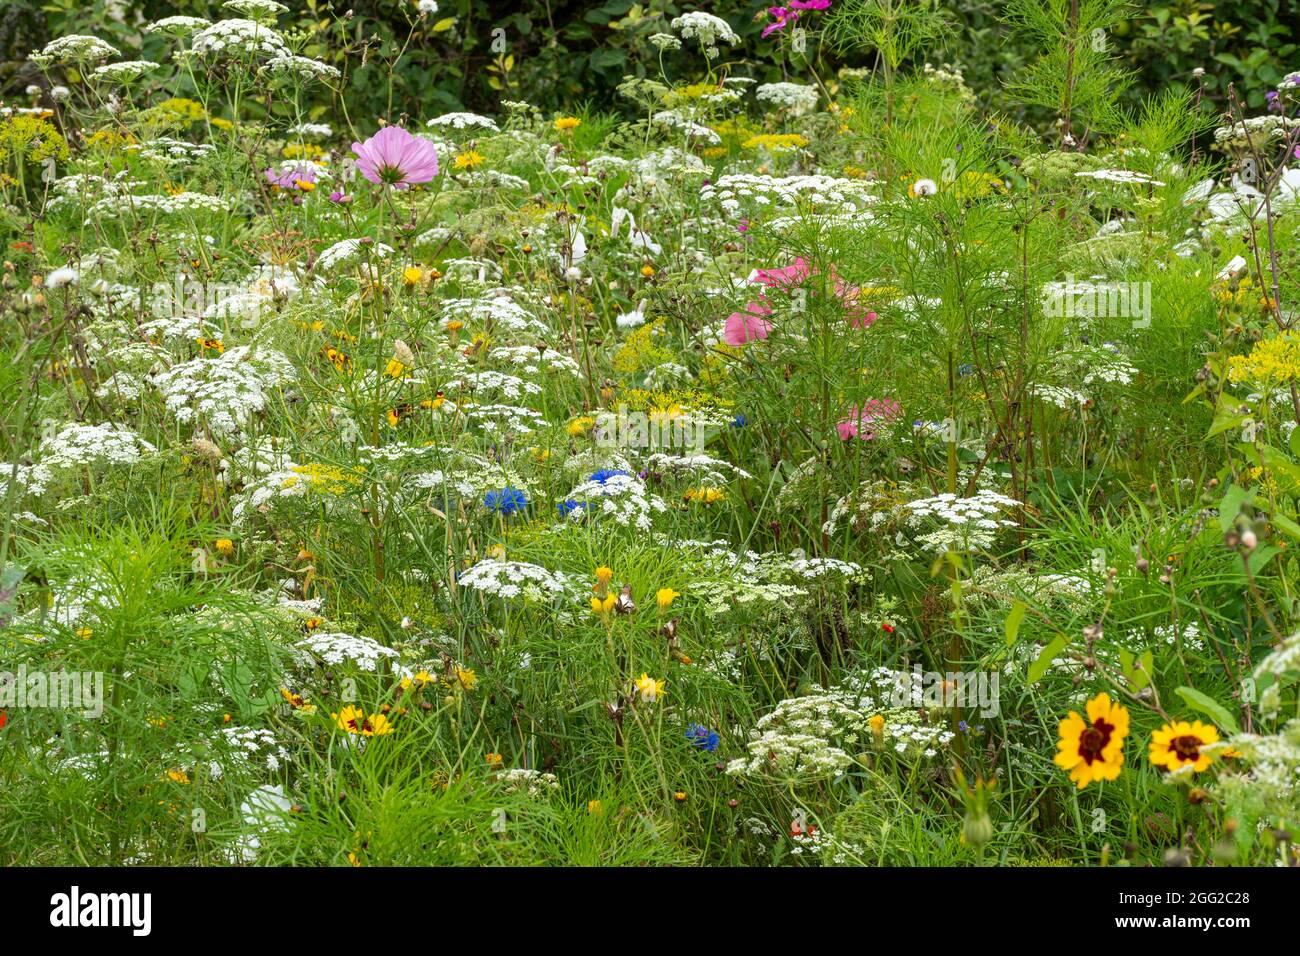 Colourful wildflower garden with flowers that are good nectar sources for pollinating insects such as bees and butterflies, summer, UK Stock Photo